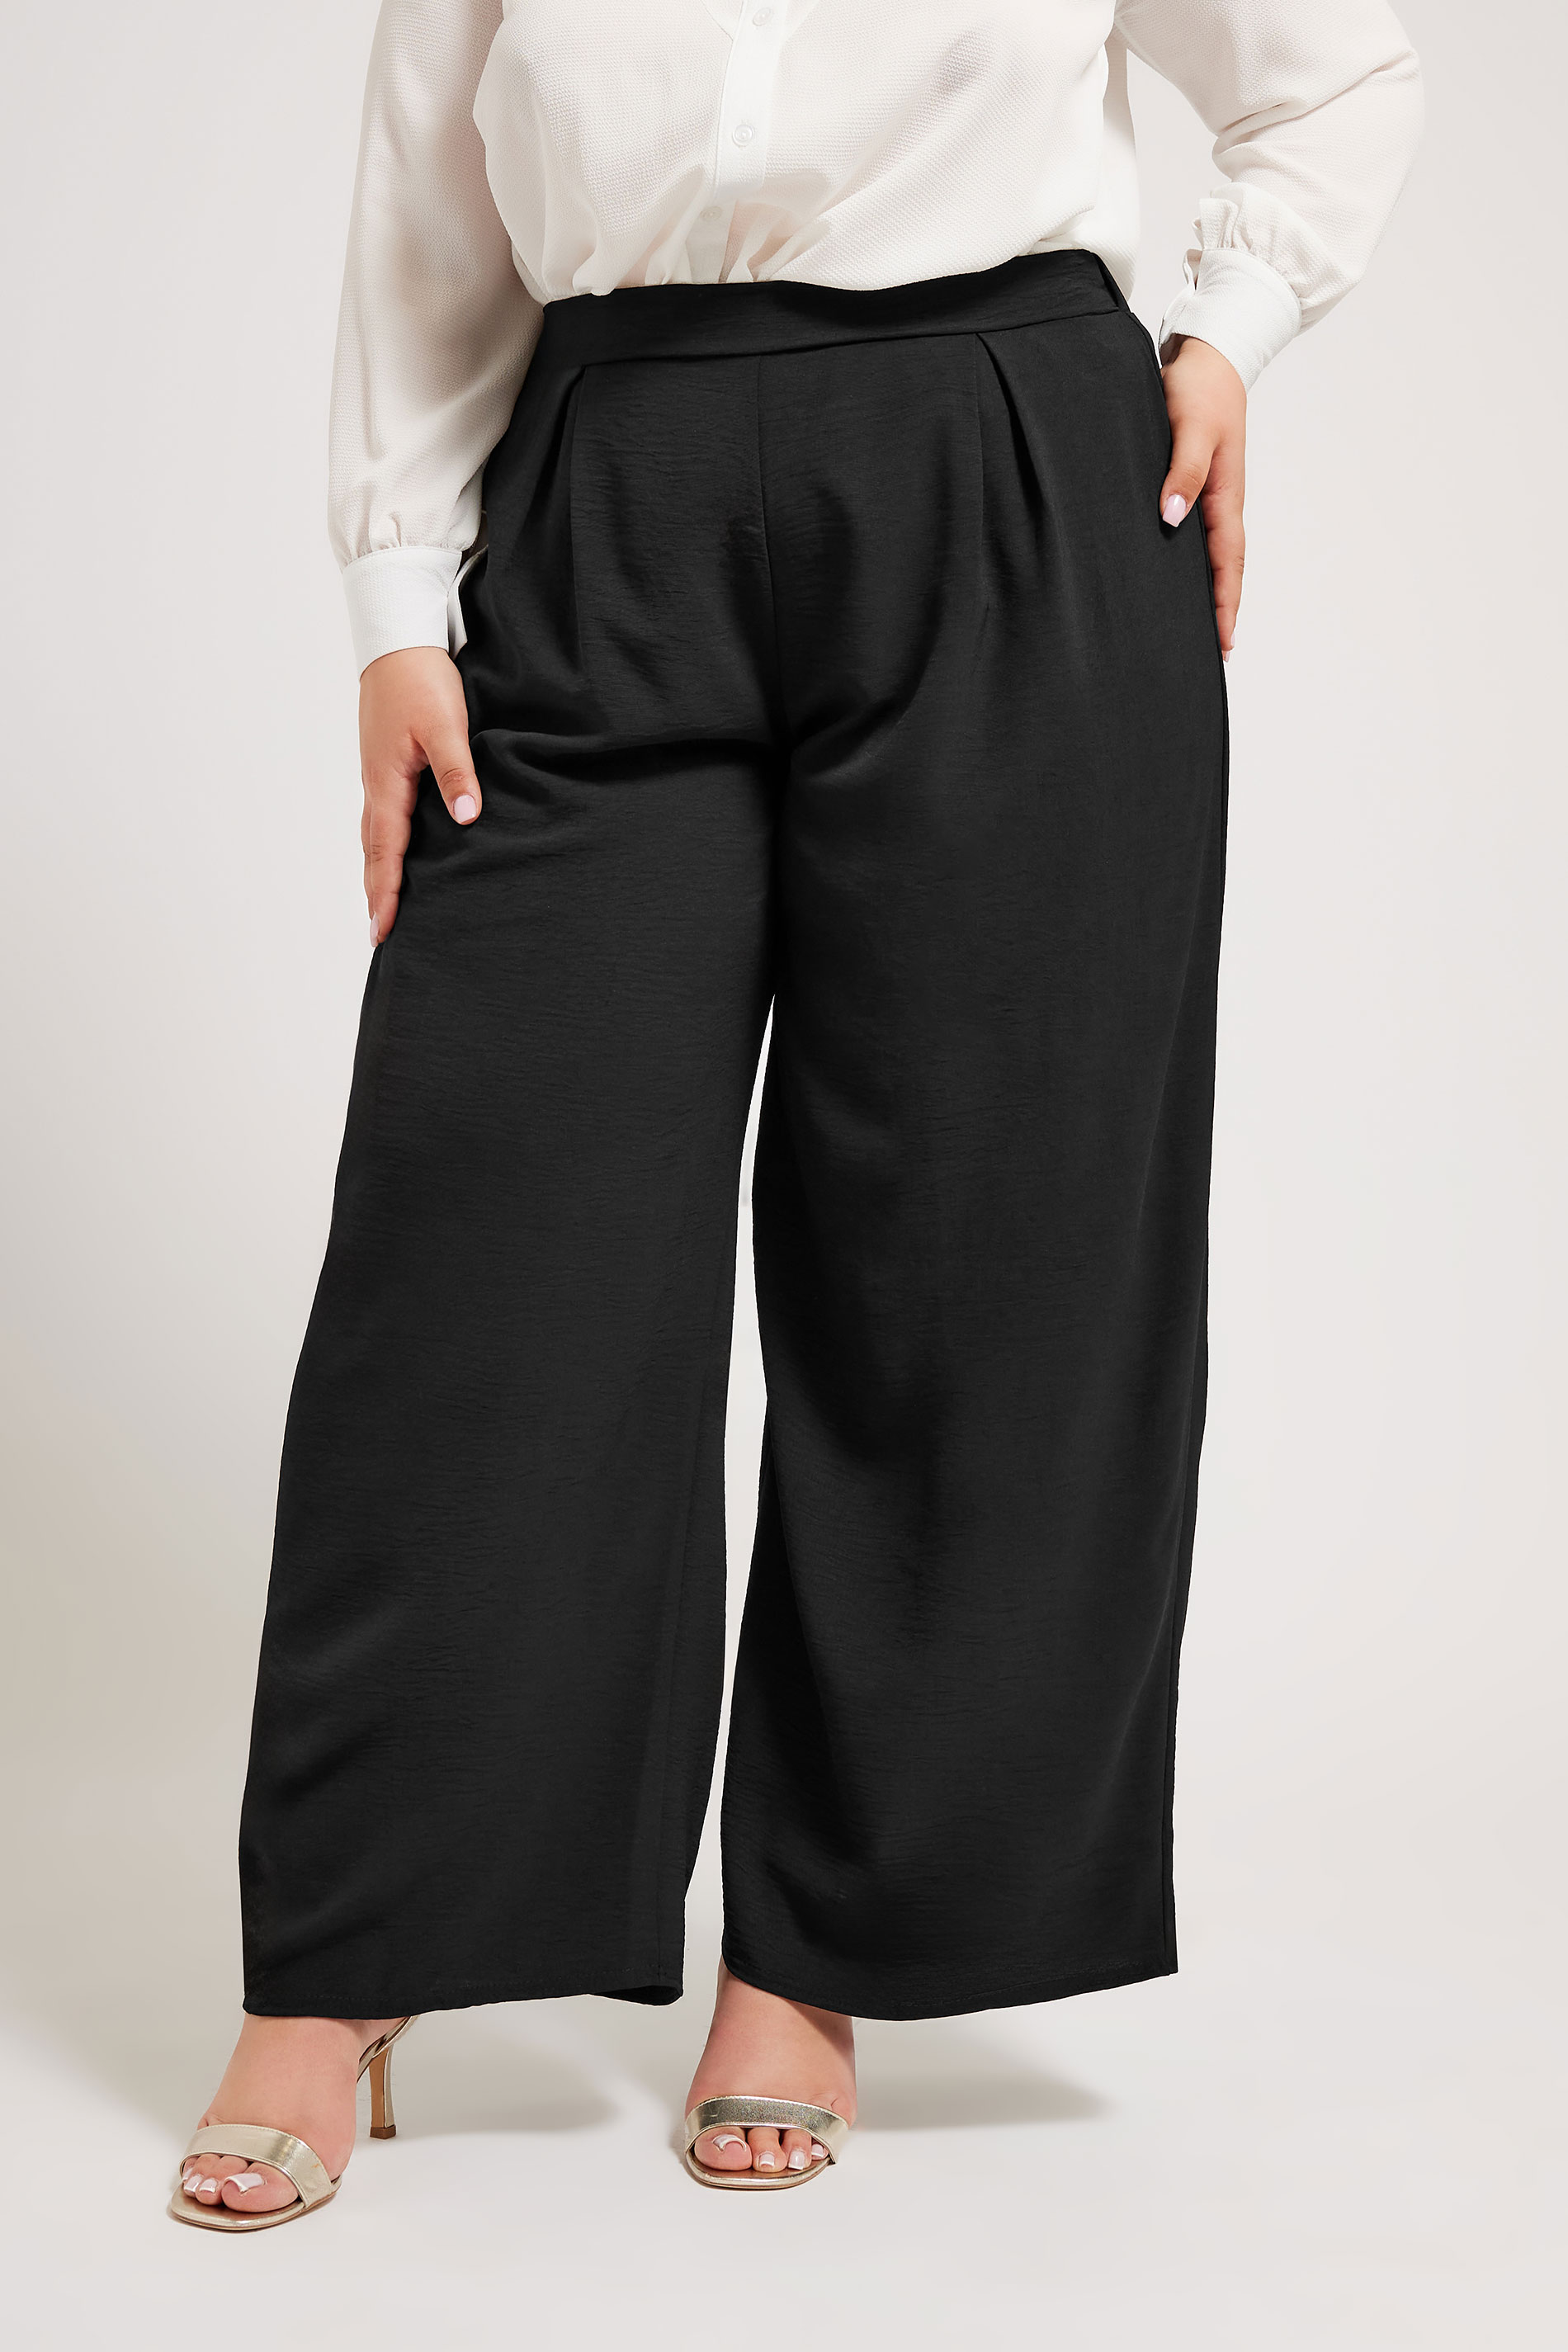 YOURS LONDON Plus Size Black Crepe Wide Leg Trousers | Yours Clothing 2